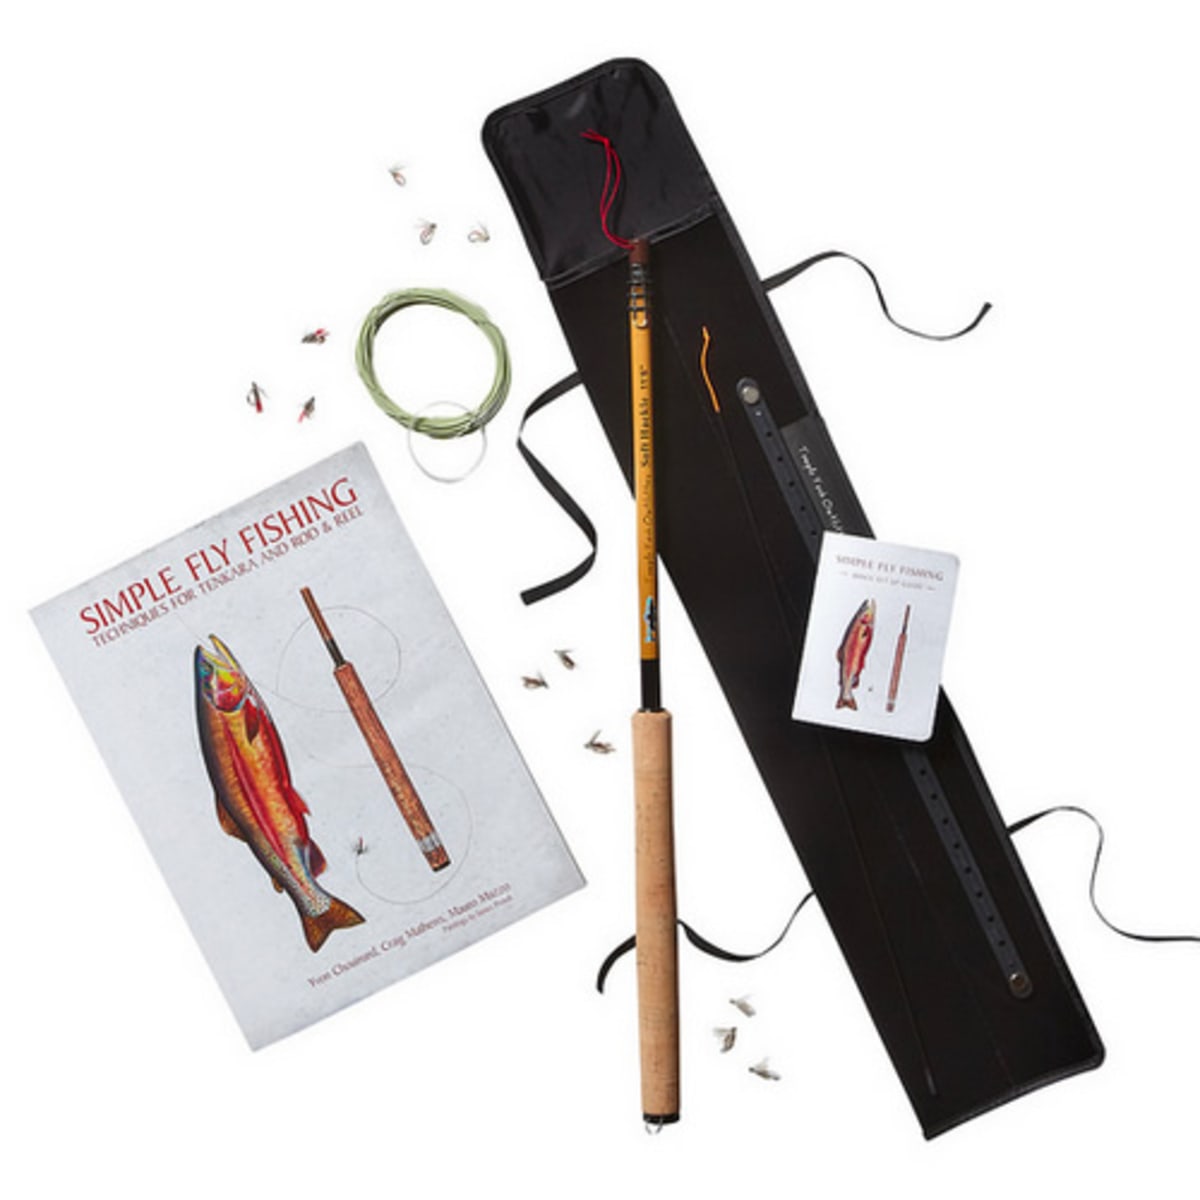 Patagonia Simple Fly Fishing Book & Kit - Acquire